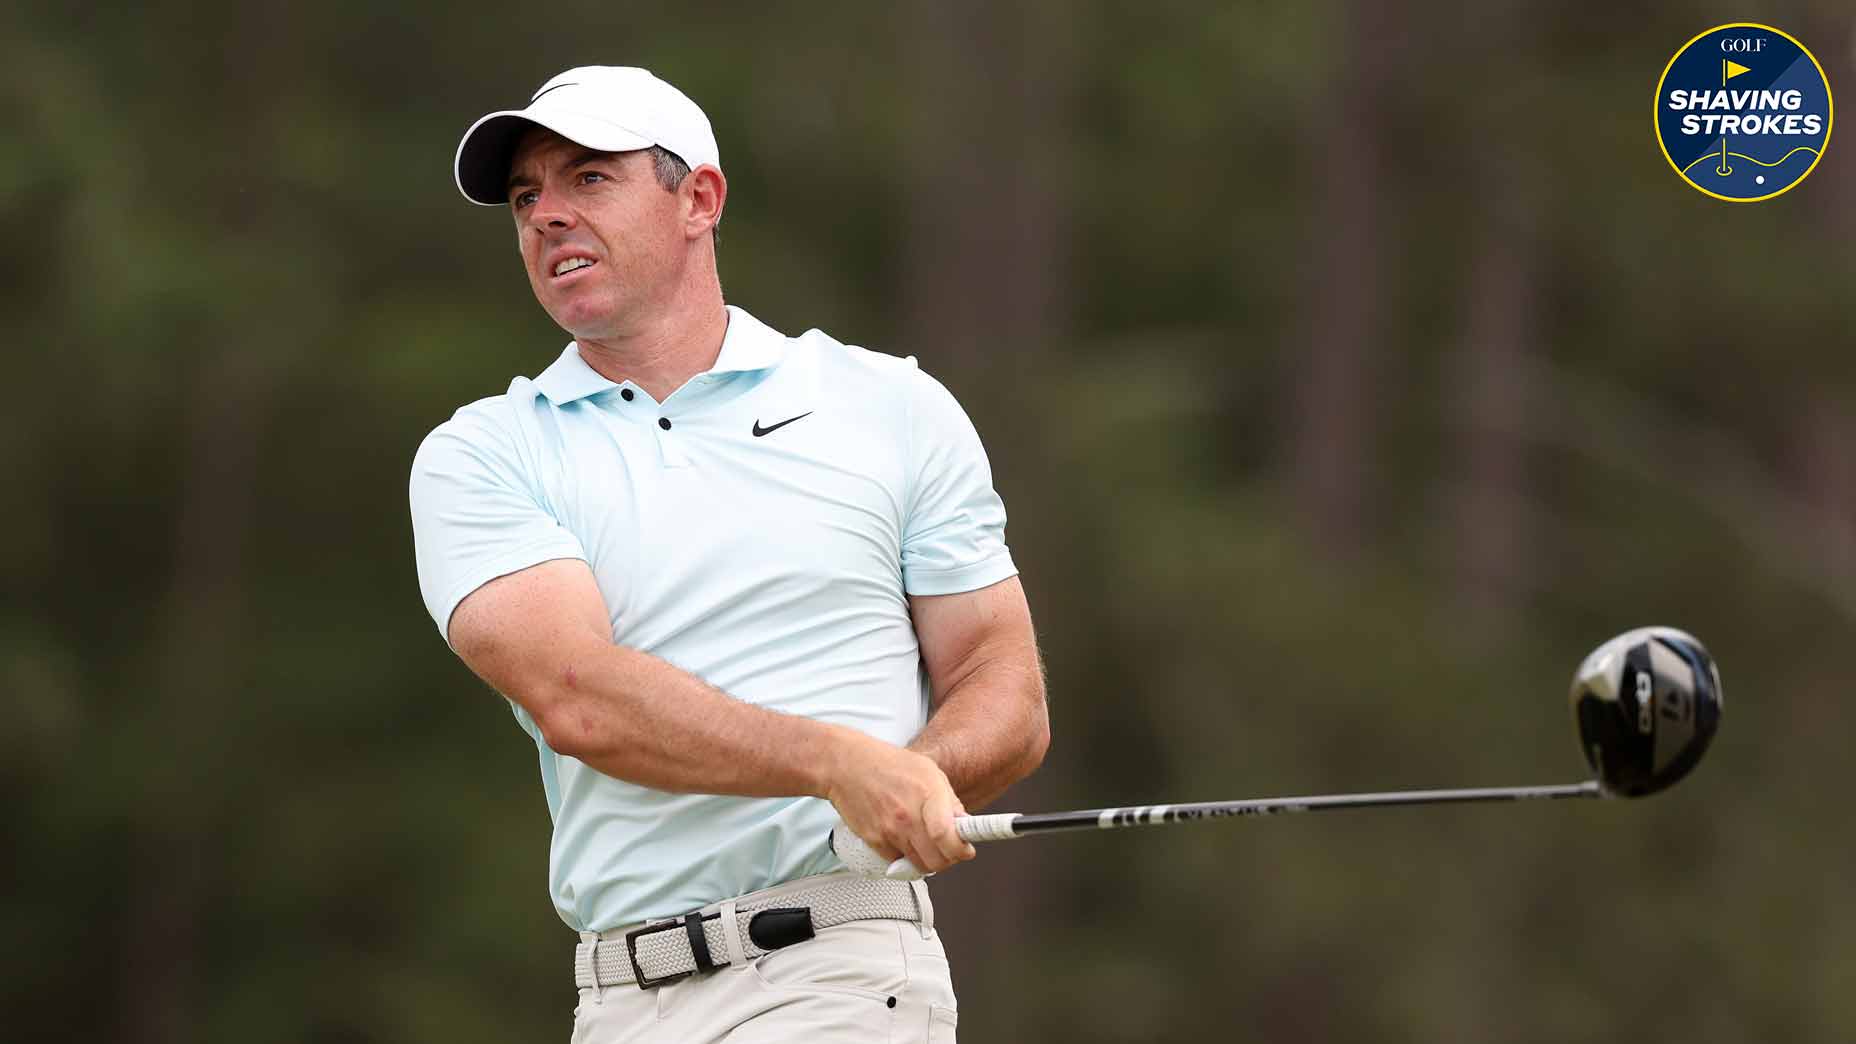 During the U.S. Open, Rory McIlroy introduced a stinger shot off the tee. GOLF Teacher to Watch Chad Gibbs shares tips to hit it yourself